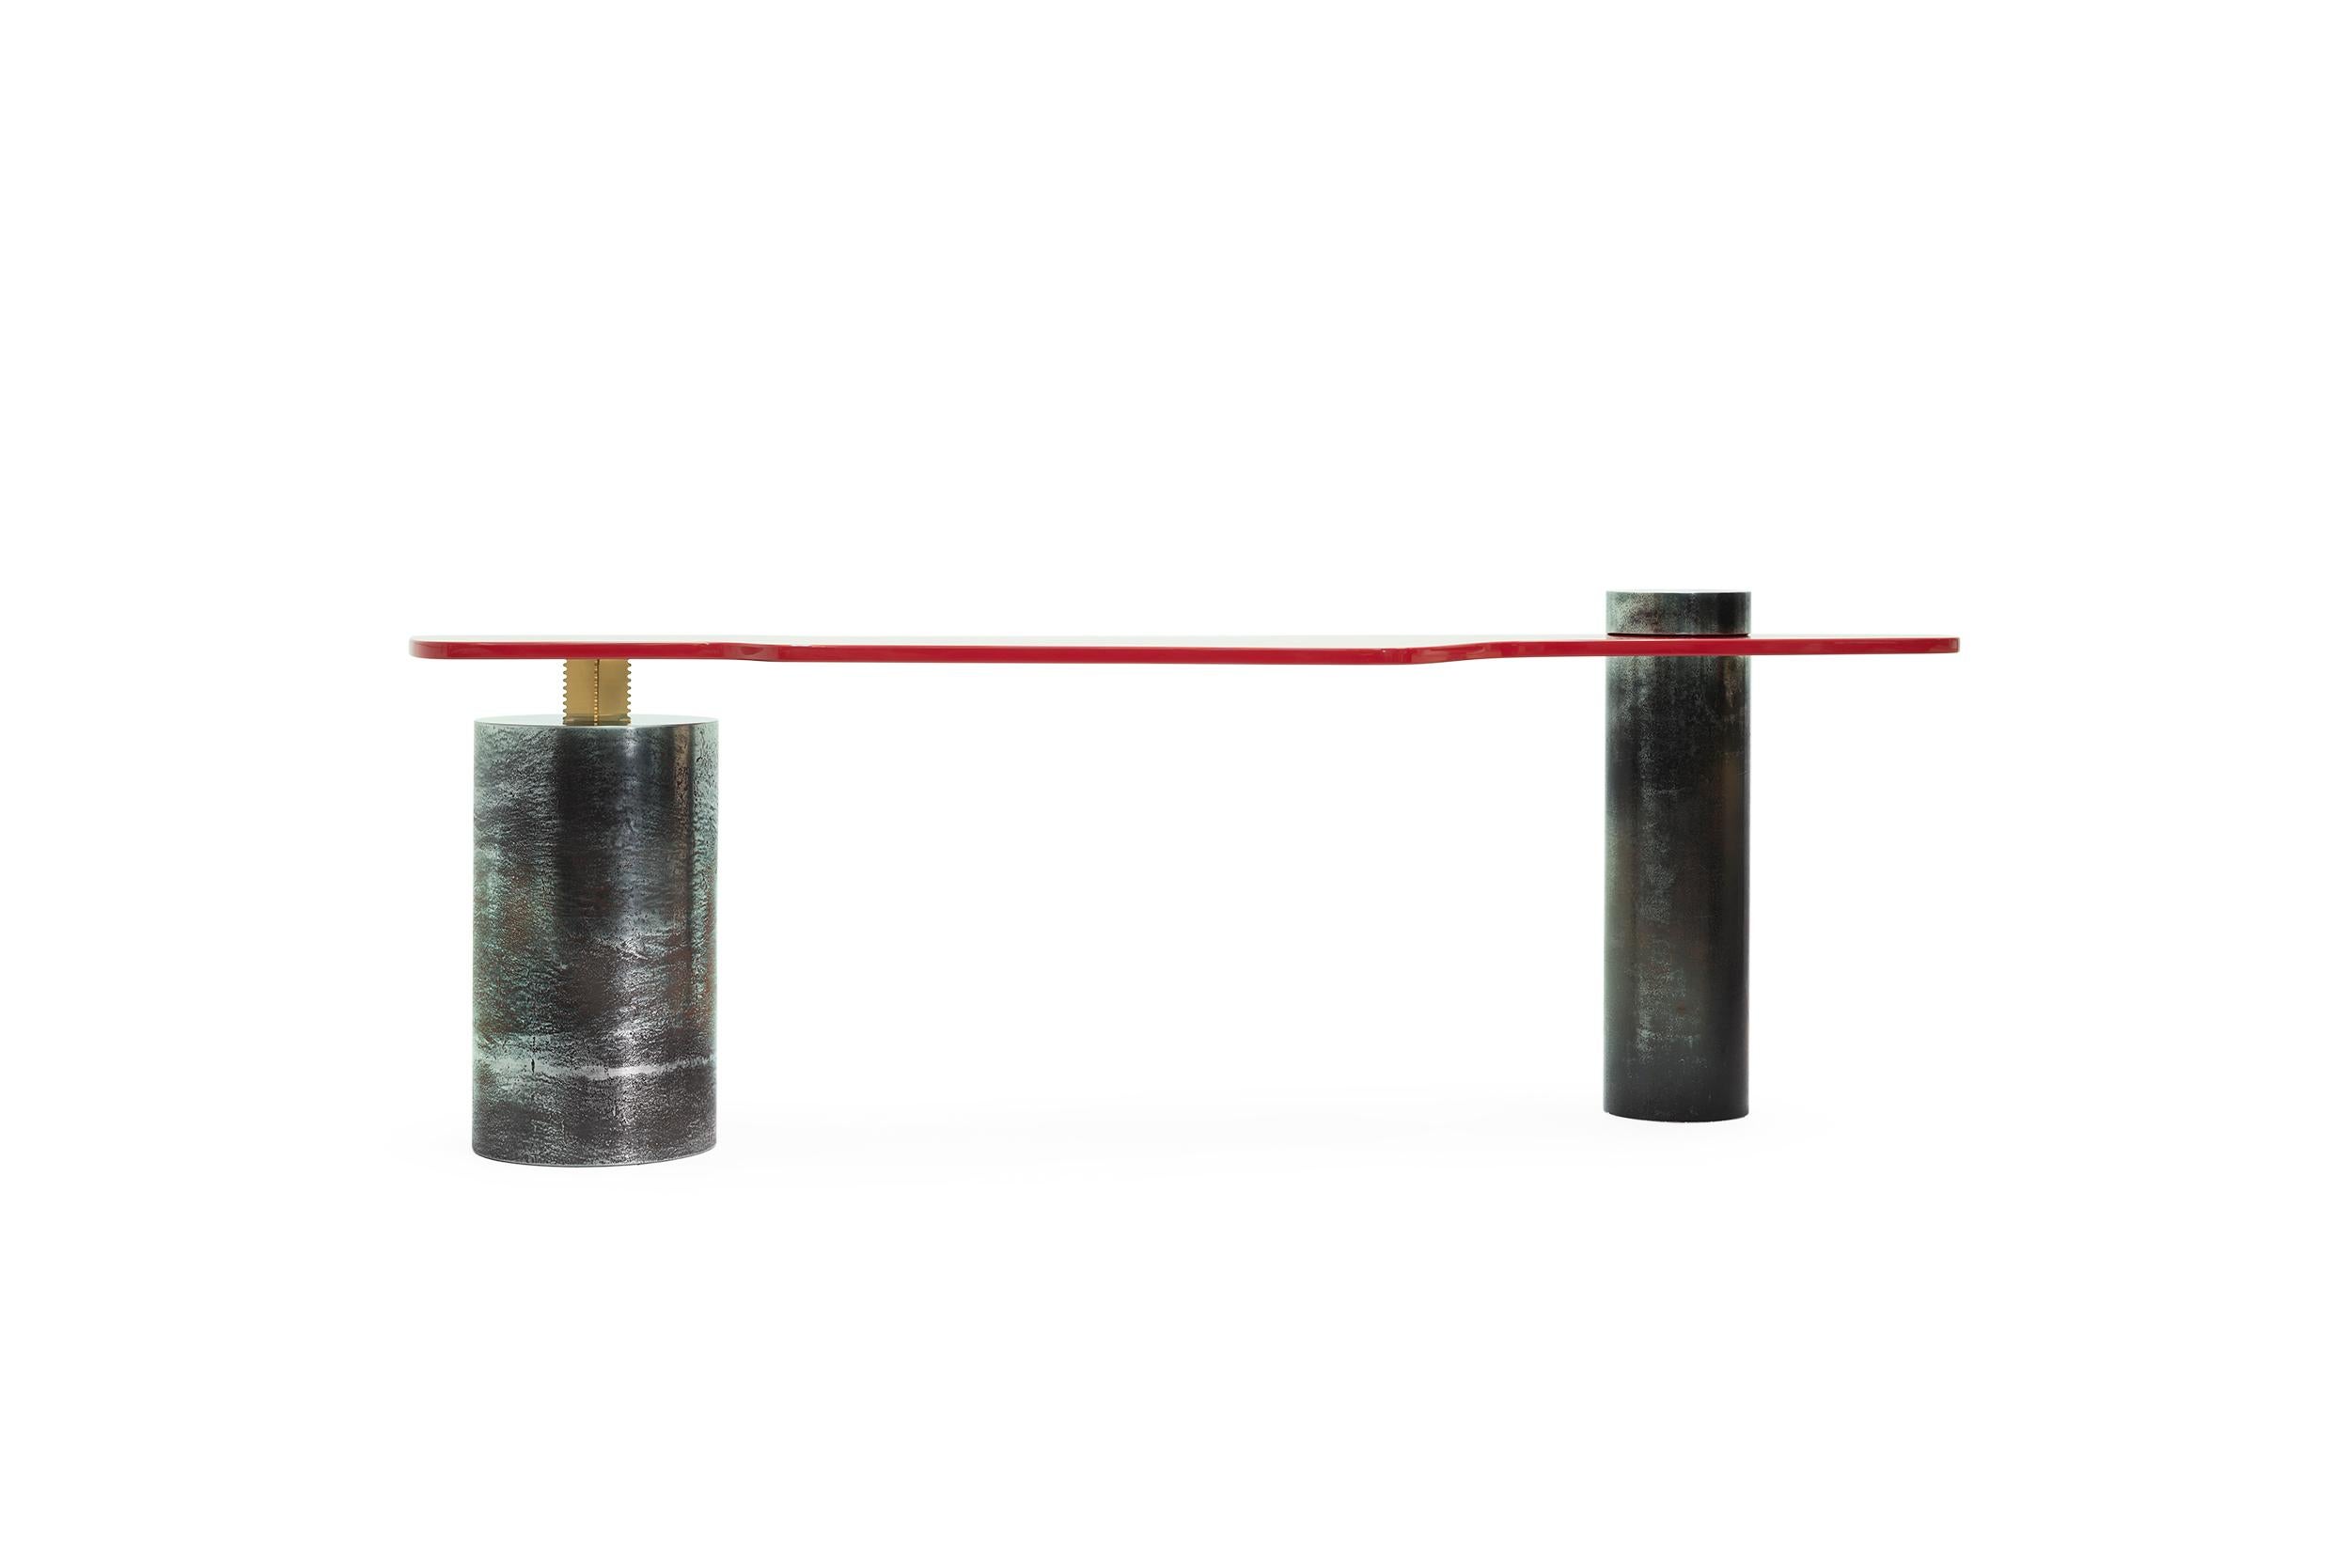 CARM CONSOLE - 21st century contemporary Carmine red lacquer patinated steel legs console table.

Is it carm or karm? Probably both. The karmic alliance of its shape, materials and vivid carmine colour transform conventional concept of a console